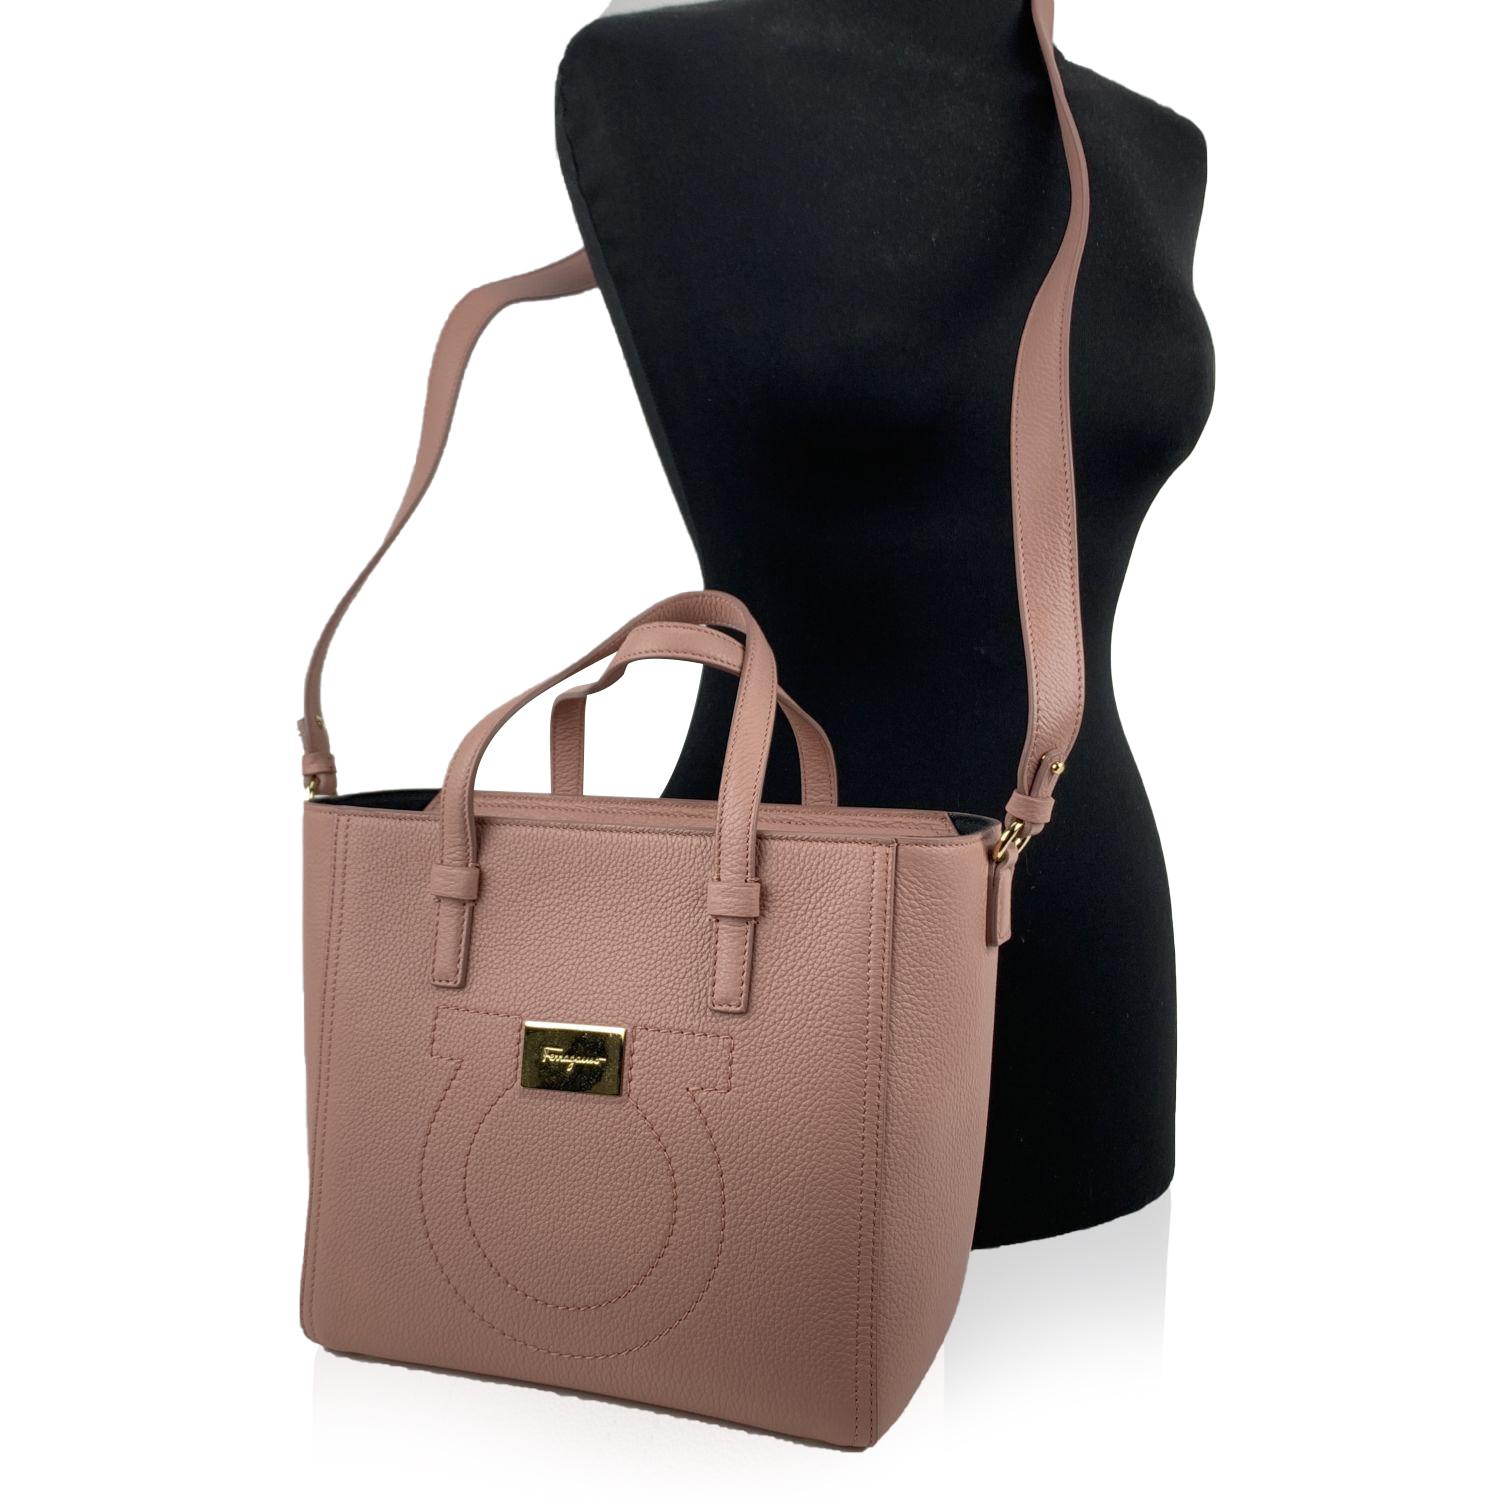 Beautiful shopper 'Marta O' bag by Salvatore Ferragamo. Made of textured pink leather. It features stitched logo detailing and gold metal logo plaque on the front, 4 protective feet, zip closure on top and and black fabric lining . 1 side open